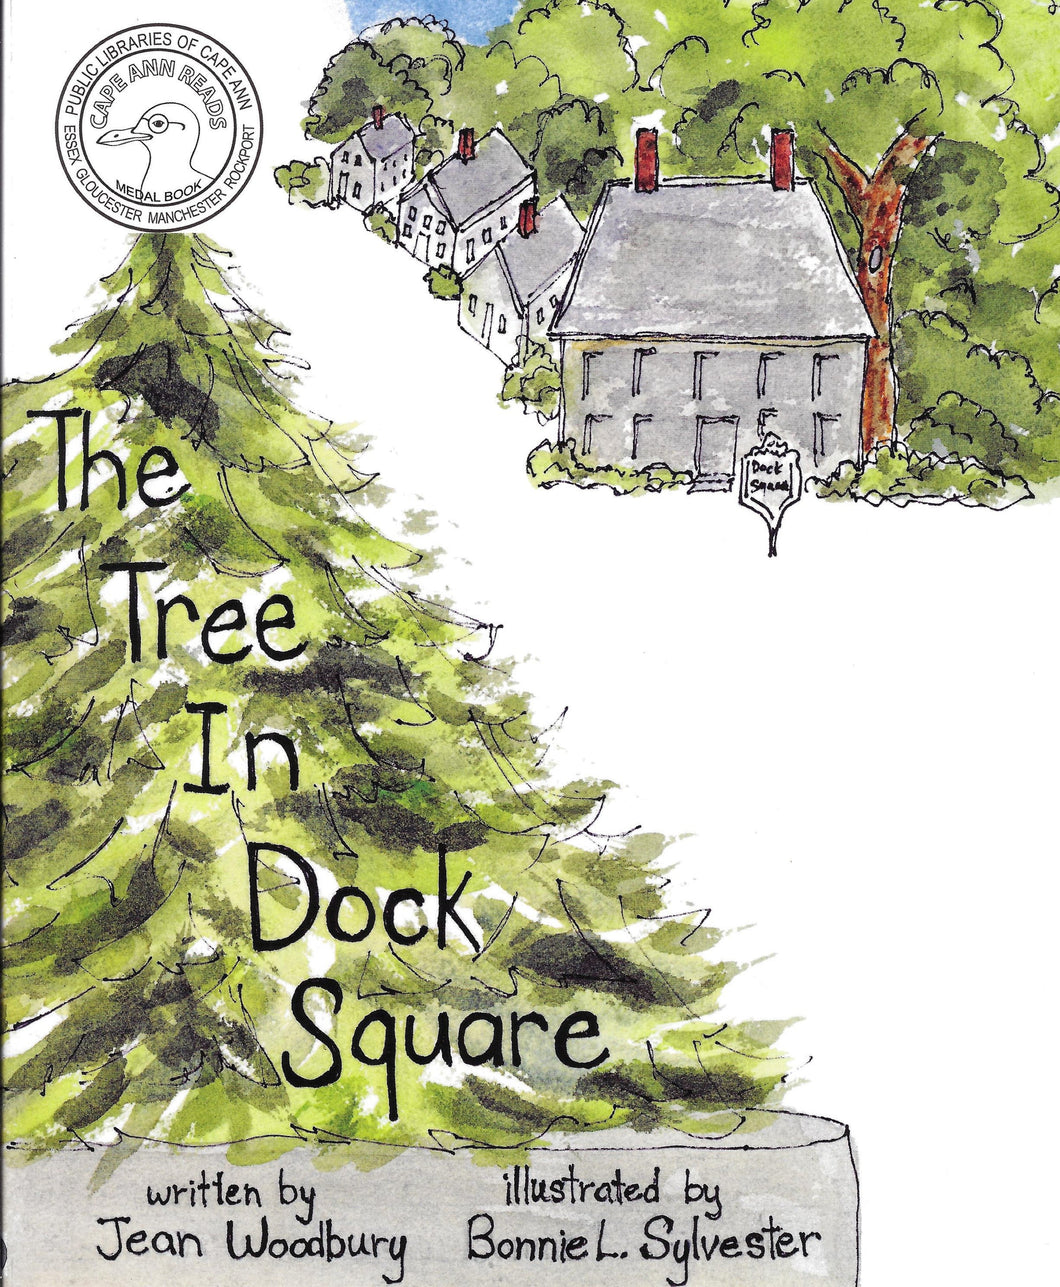 The Tree in Dock Square